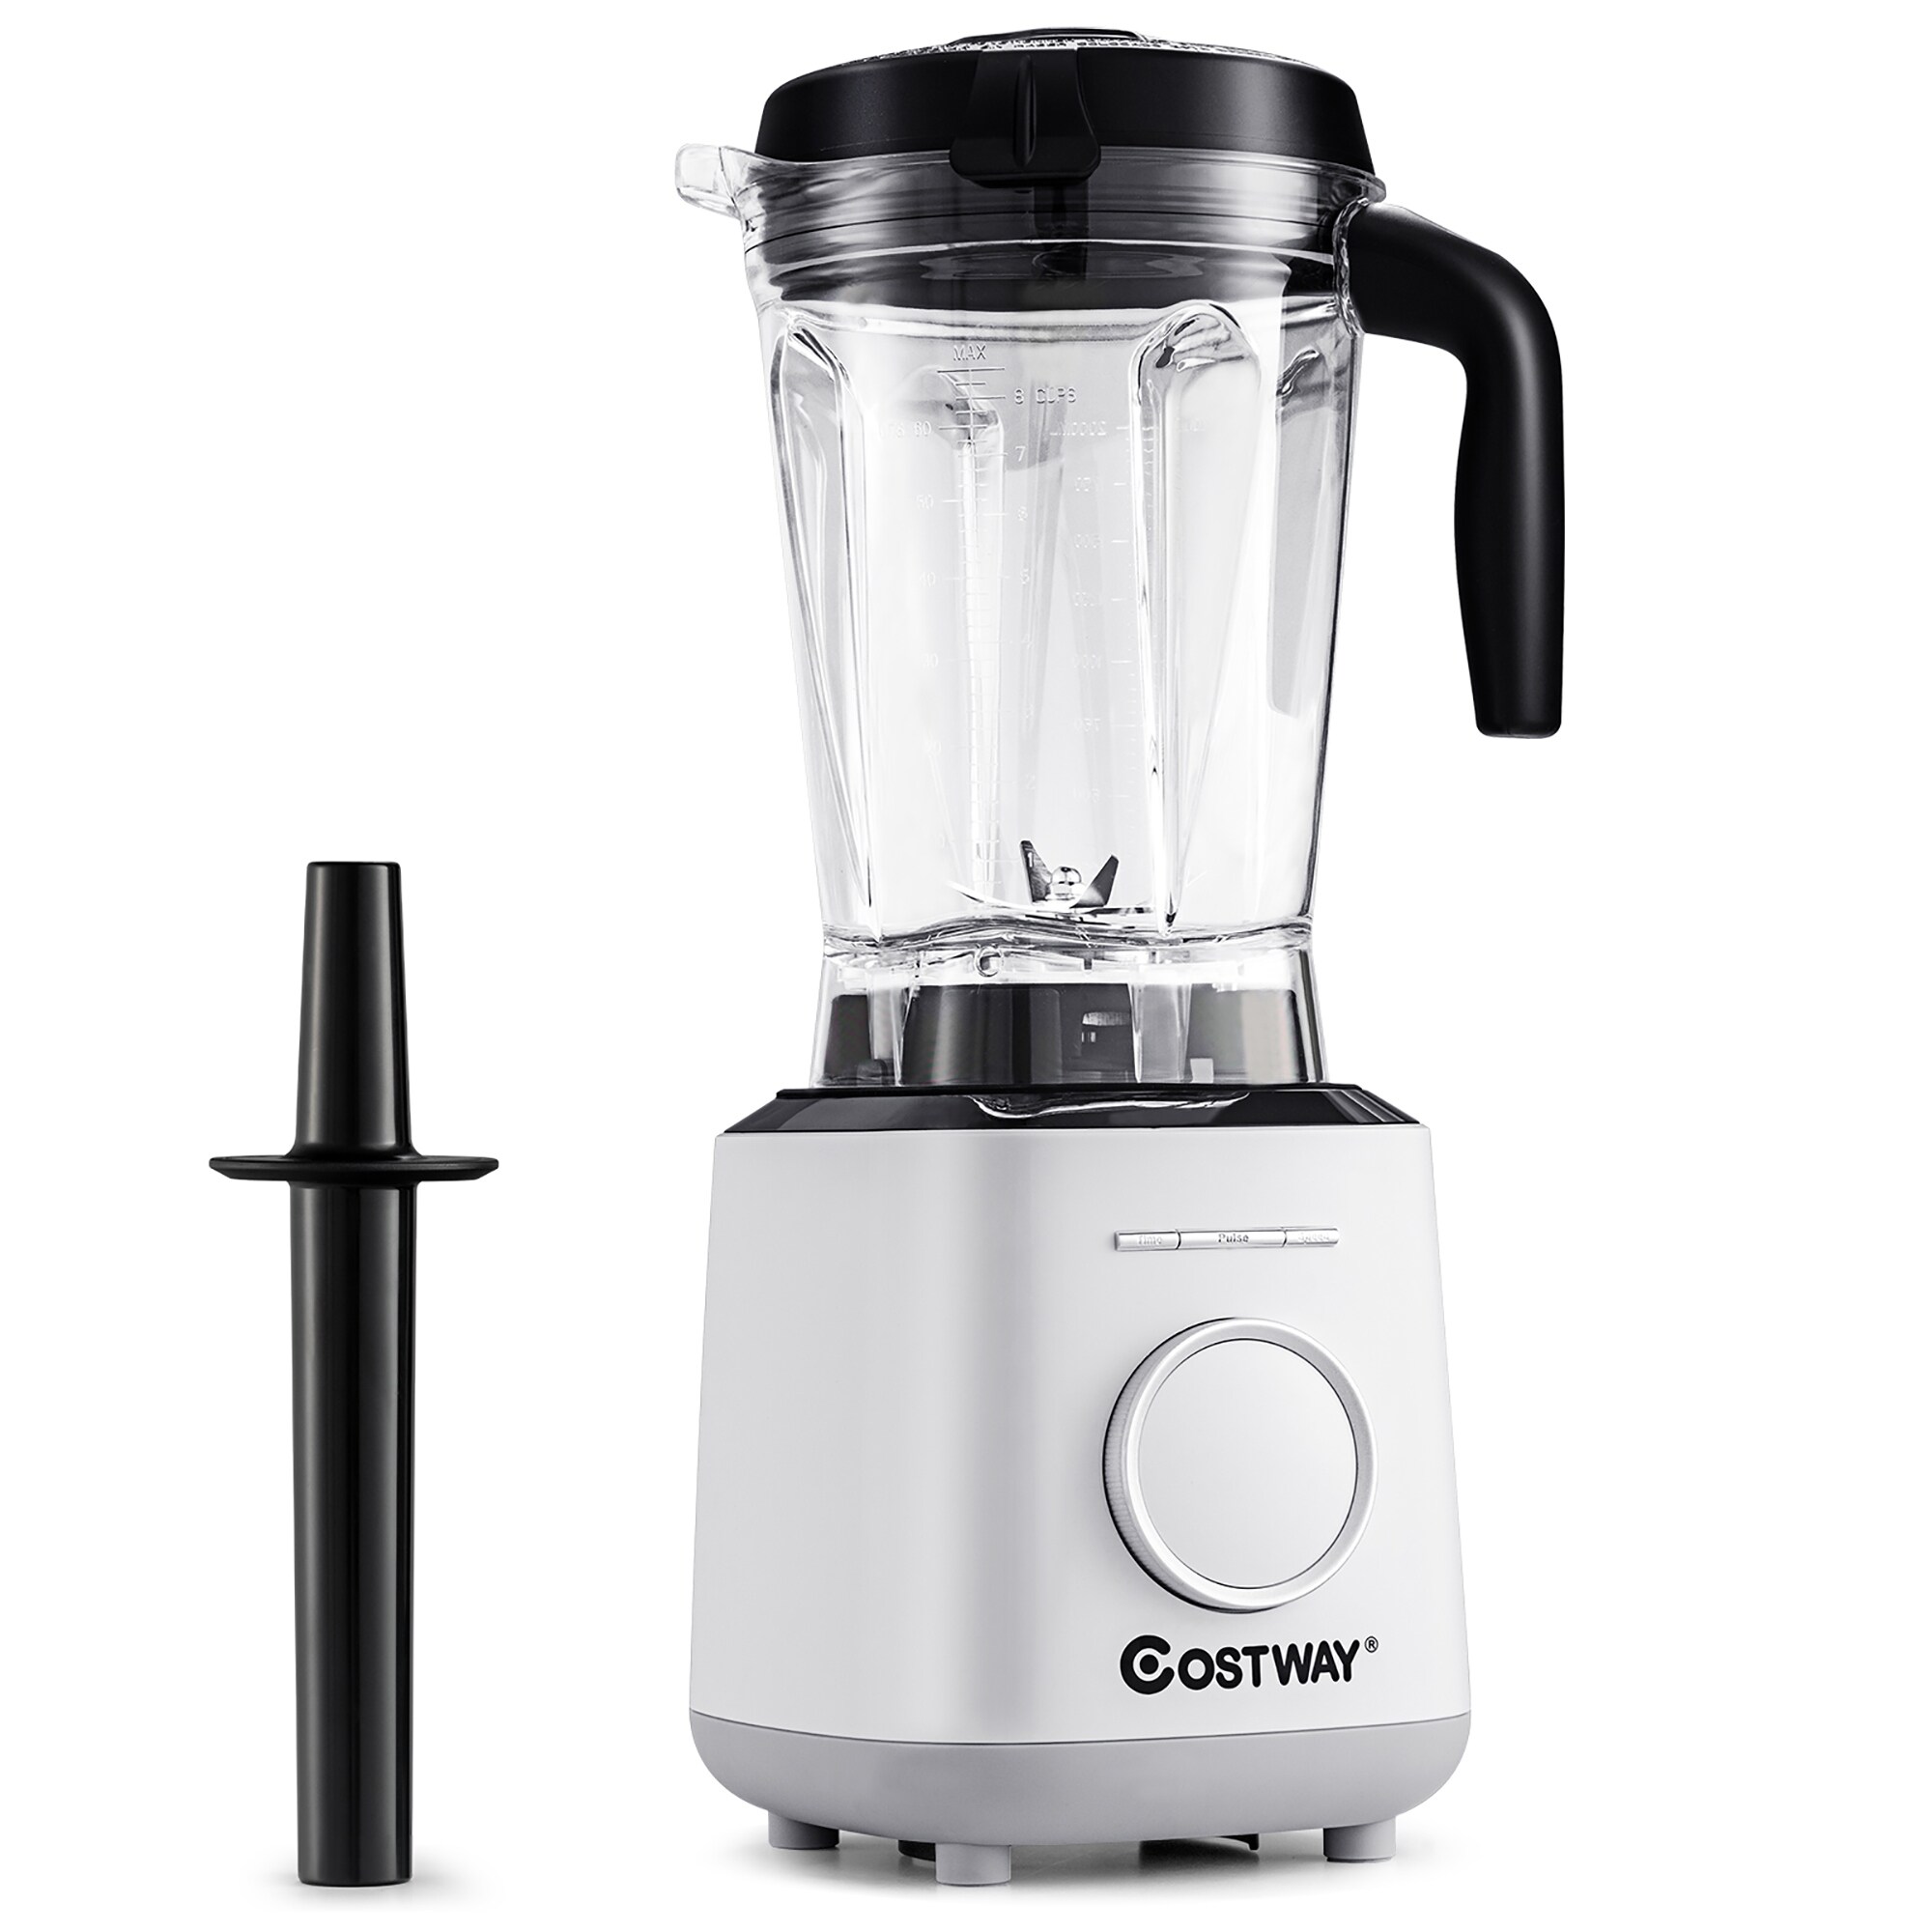 https://ak1.ostkcdn.com/images/products/is/images/direct/1a674cfcc2a14fc5703ab06a0c819accf5b4b646/Costway-1500W-Countertop-Smoothies-Blender-10-Speed-w--6-Pre-Setting.jpg